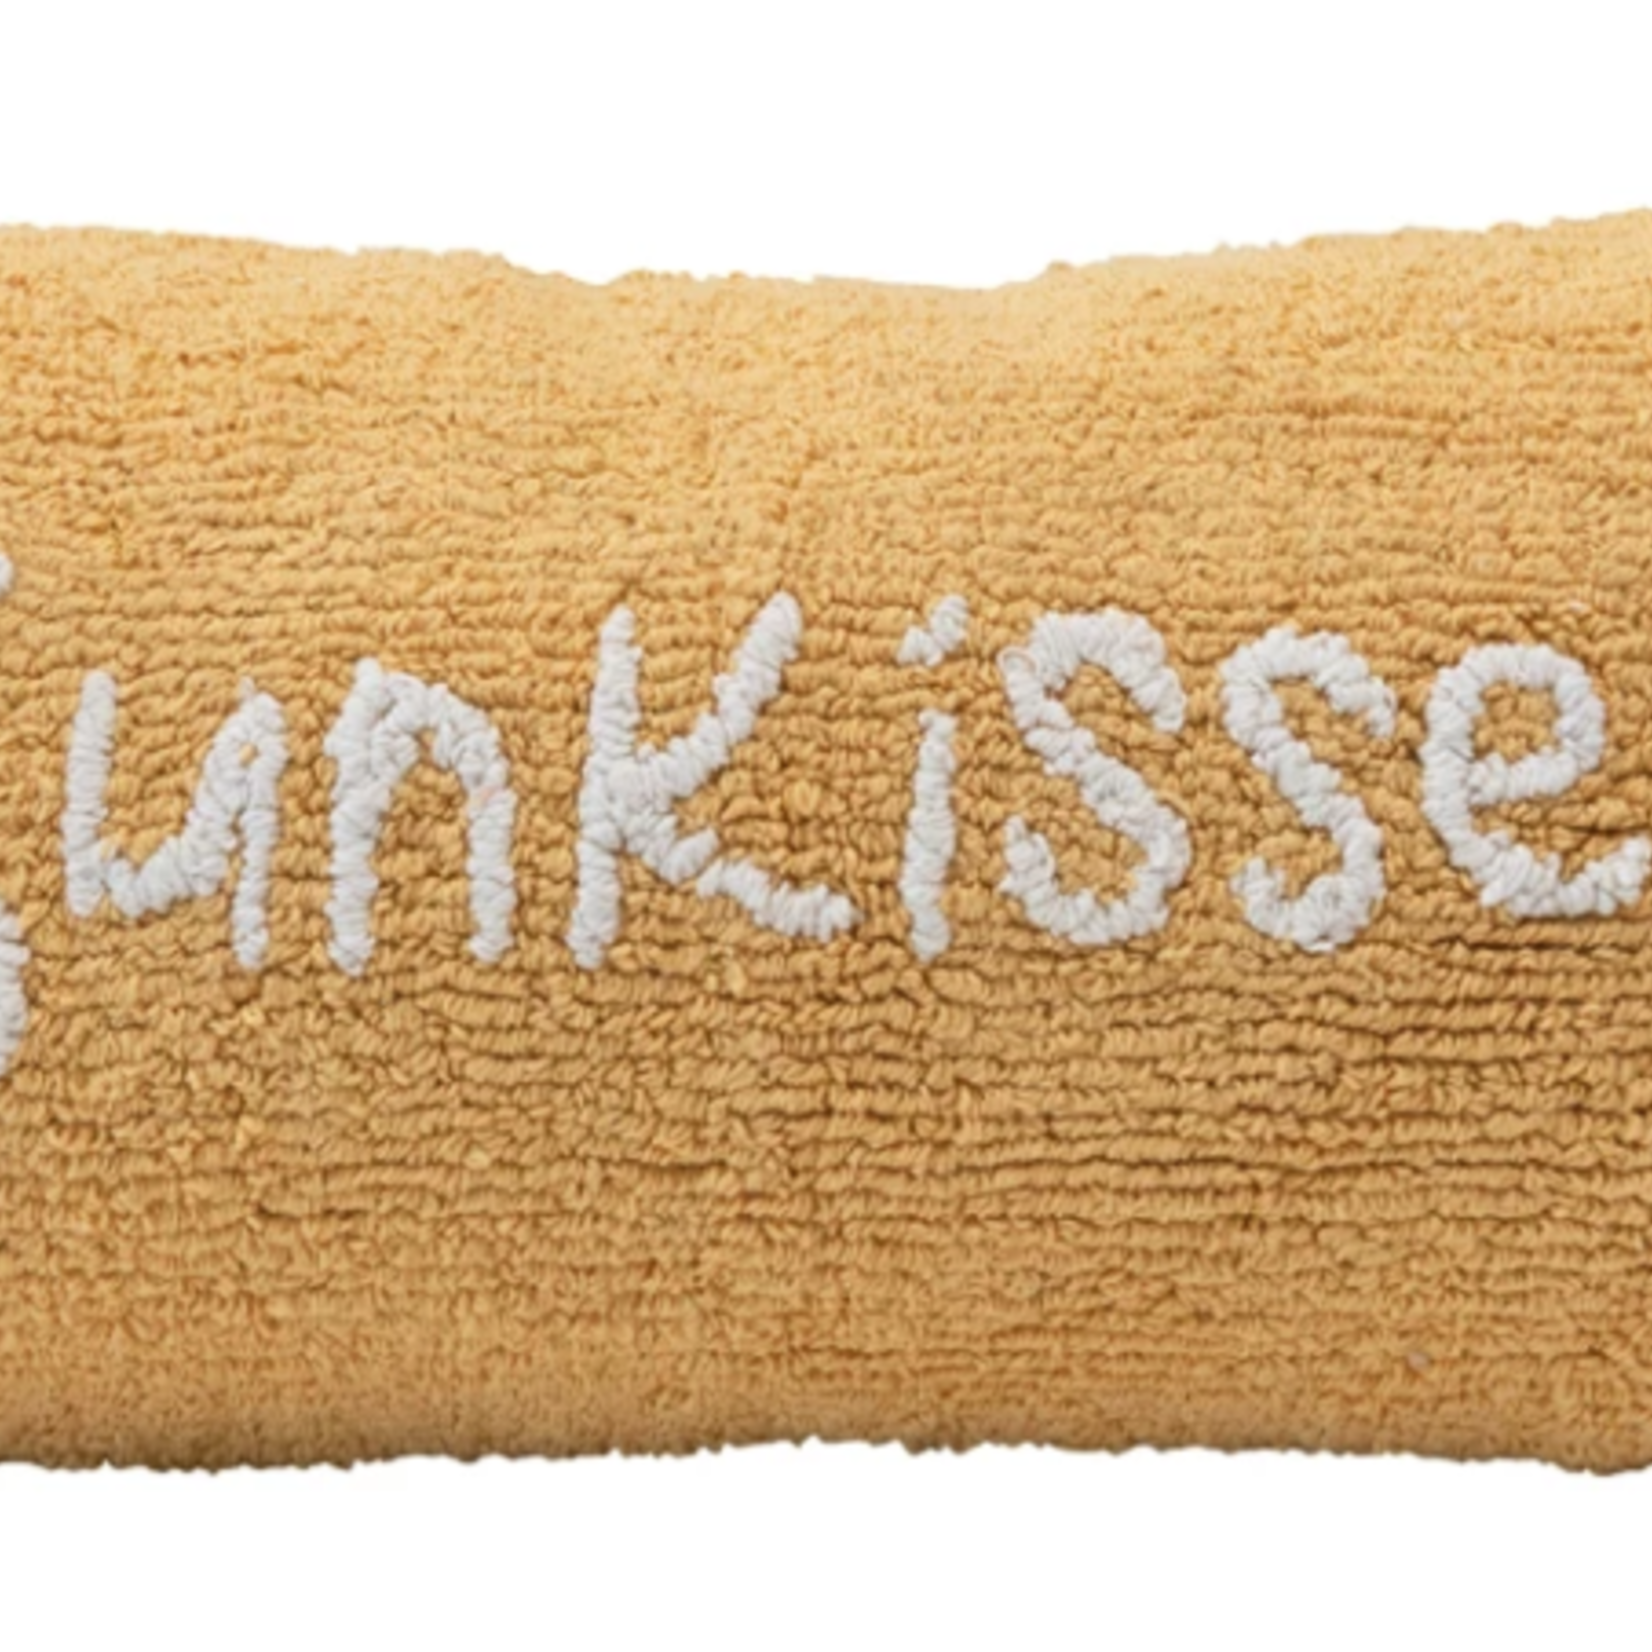 Sunkissed Cotton Punch Hook Lumbar Pillow